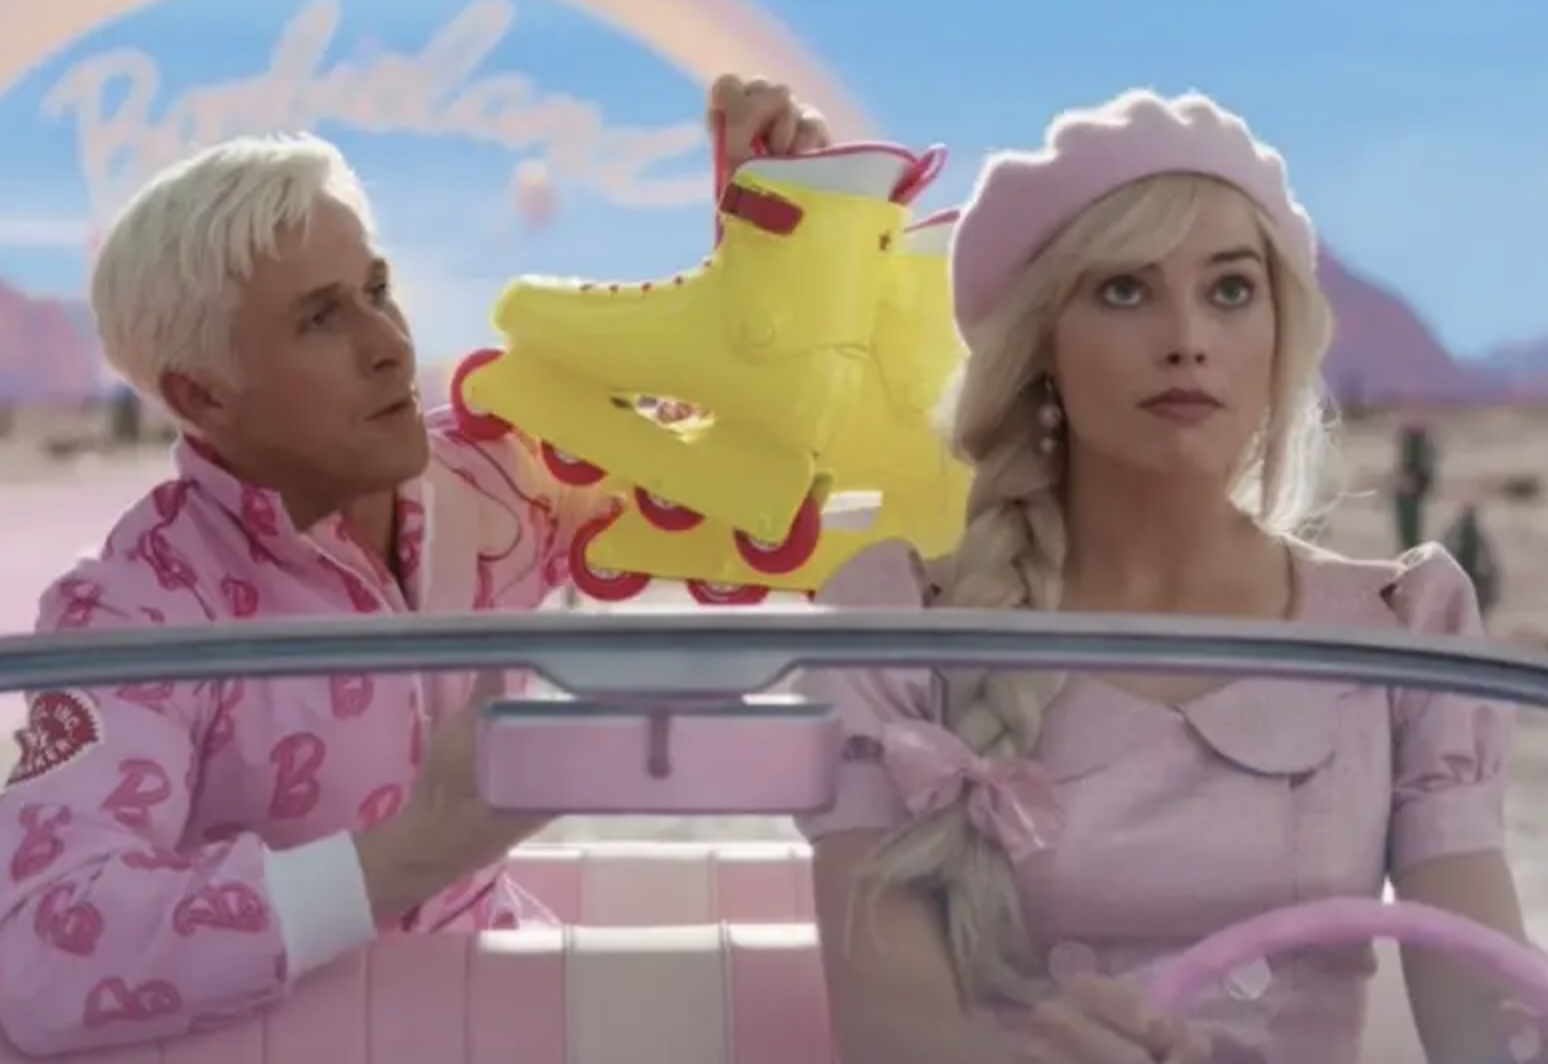 Barbie and Ken driving in the Barbie movie